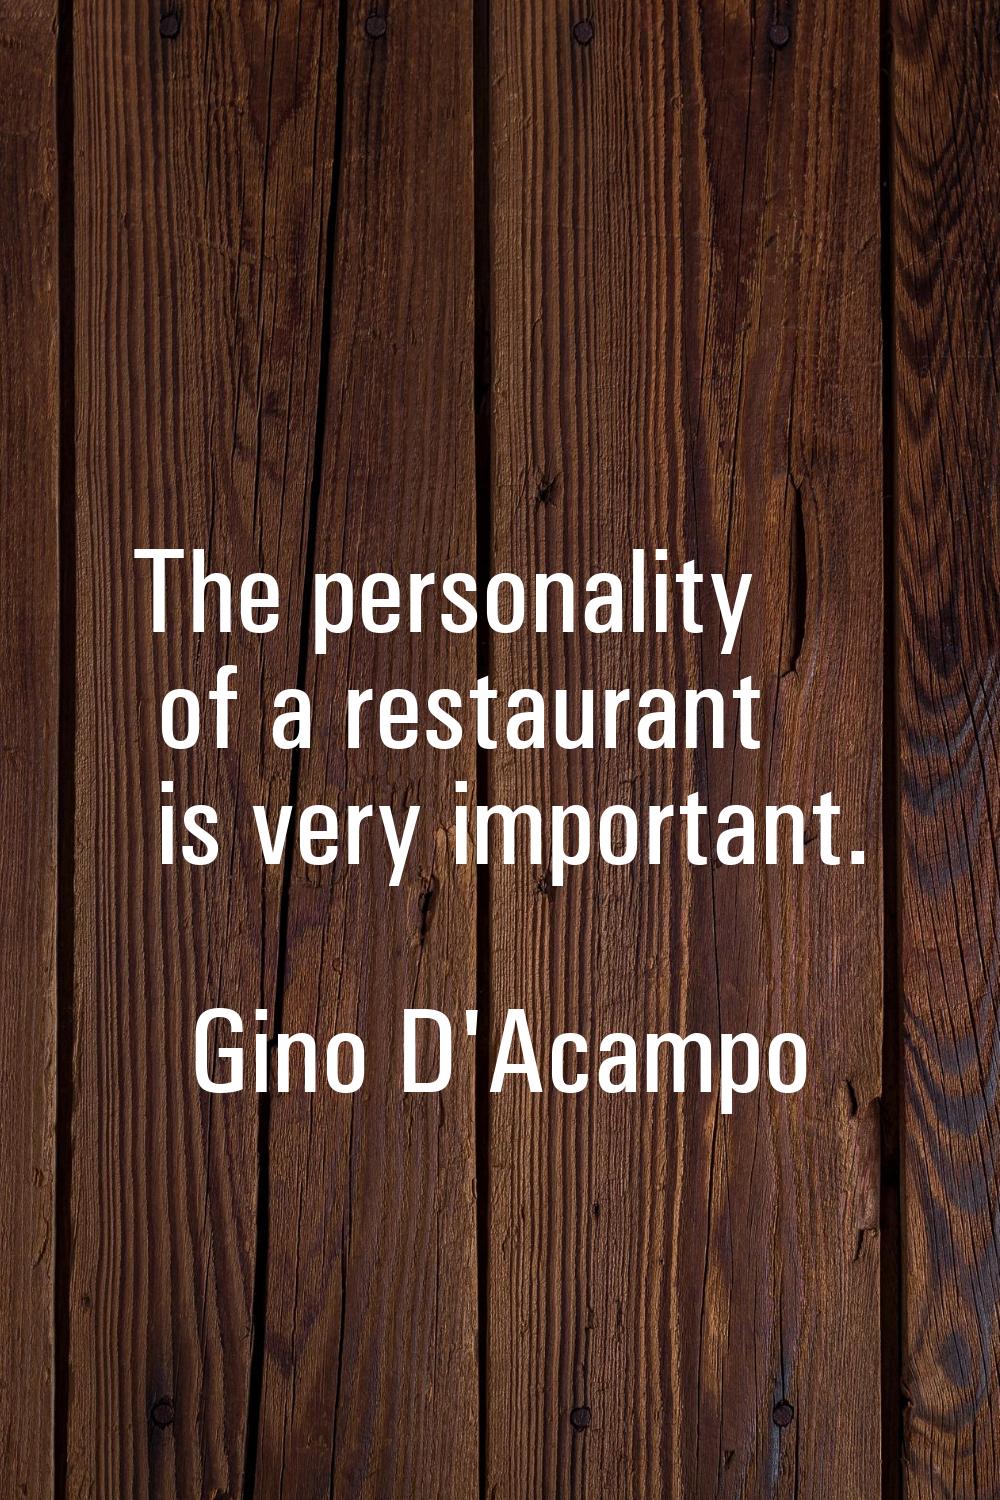 The personality of a restaurant is very important.